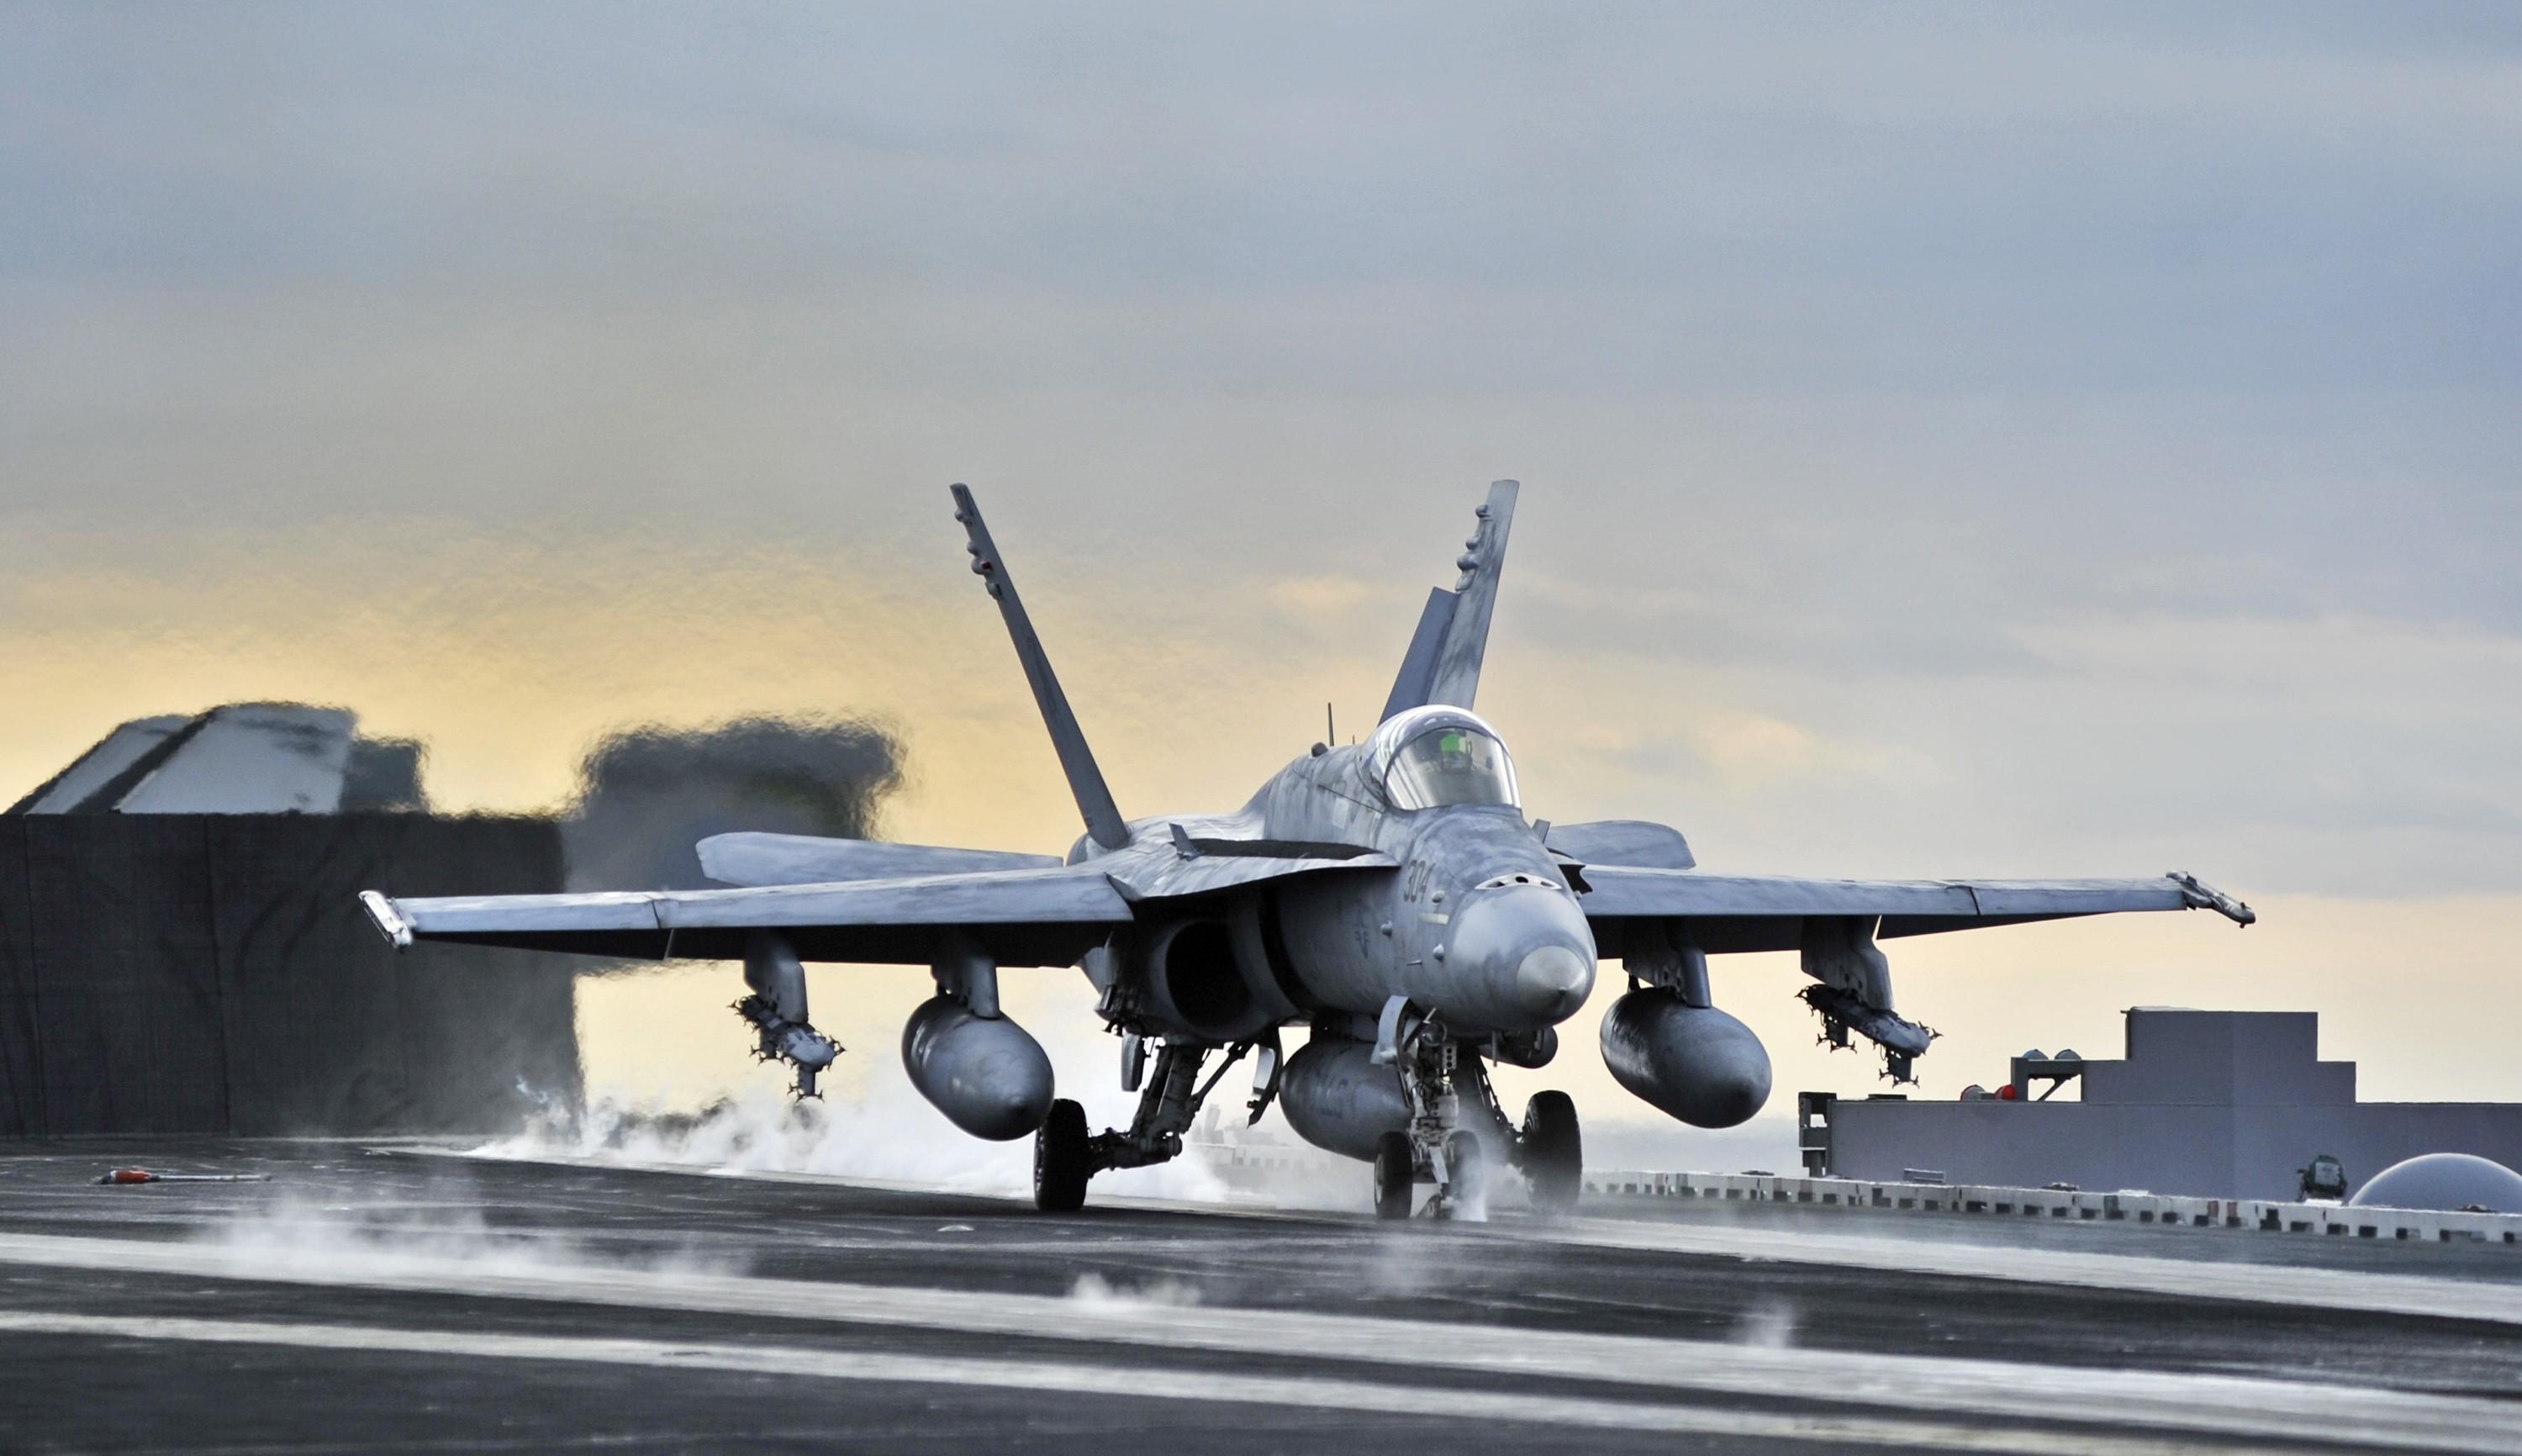 Carrier, Airplanes, Take Off, F 18 Hornet, Jet Aircraft